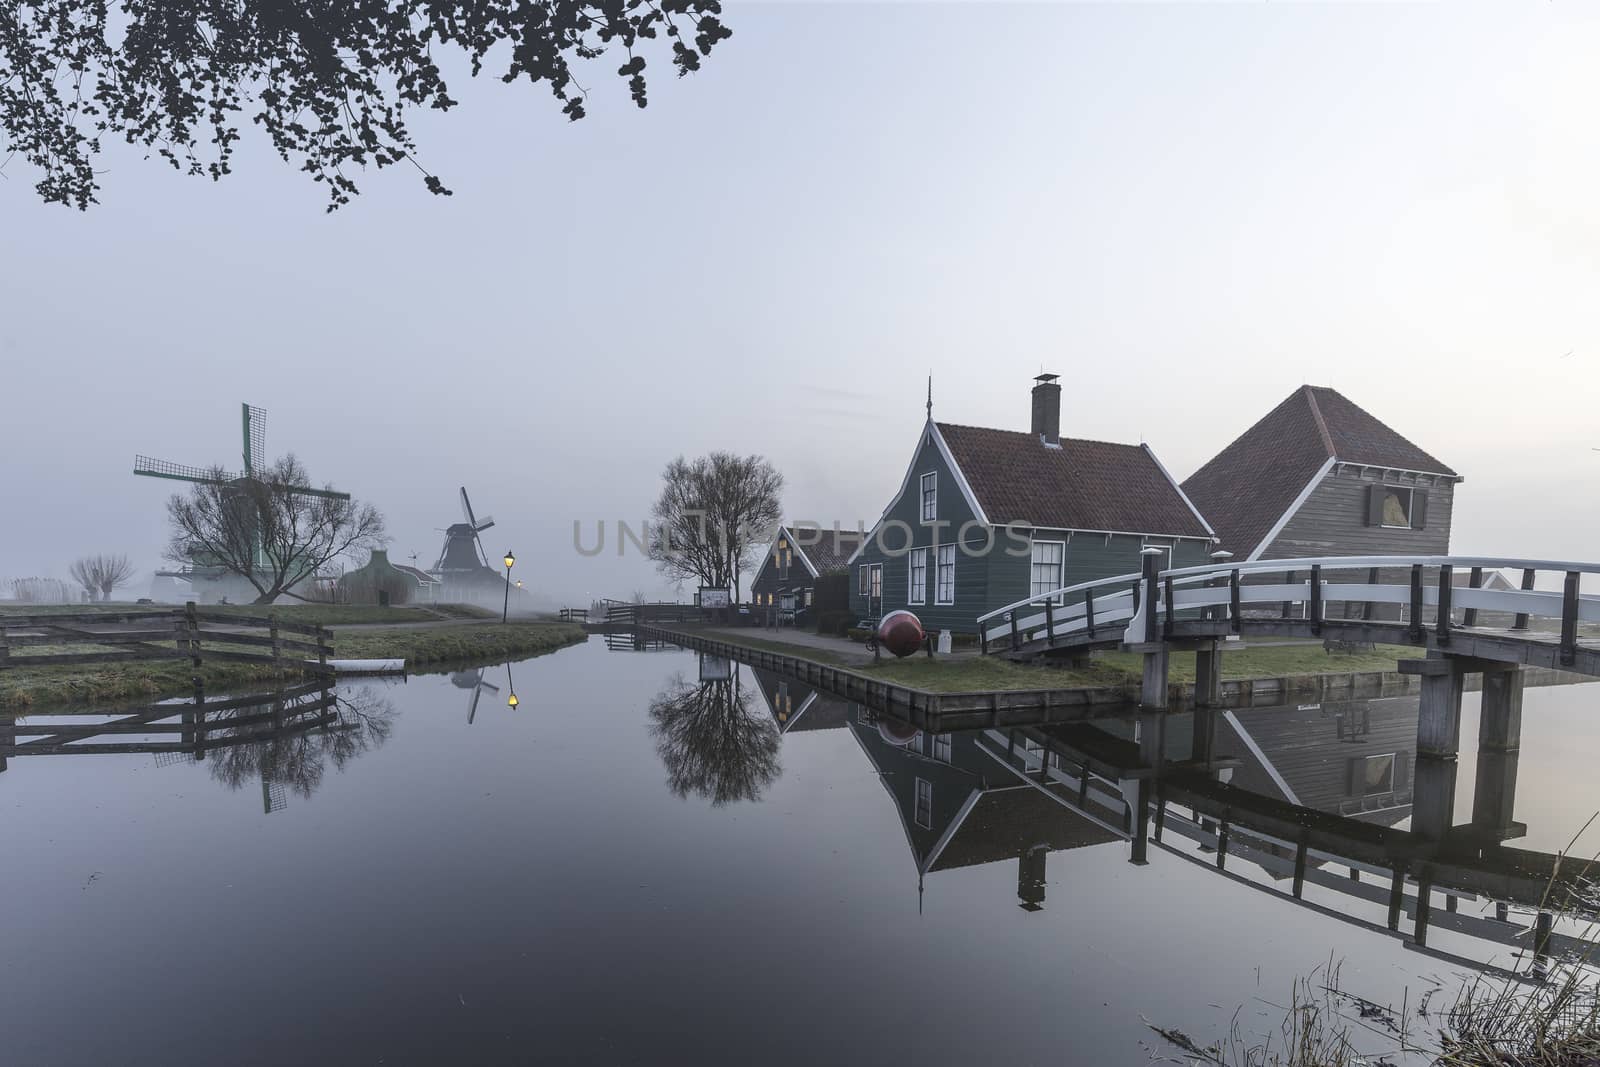 Beautiful typical Dutch wooden houses architecture mirrored on the calm canal of Zaanse Schans located at the North of Amsterdam, Netherlands by ankorlight